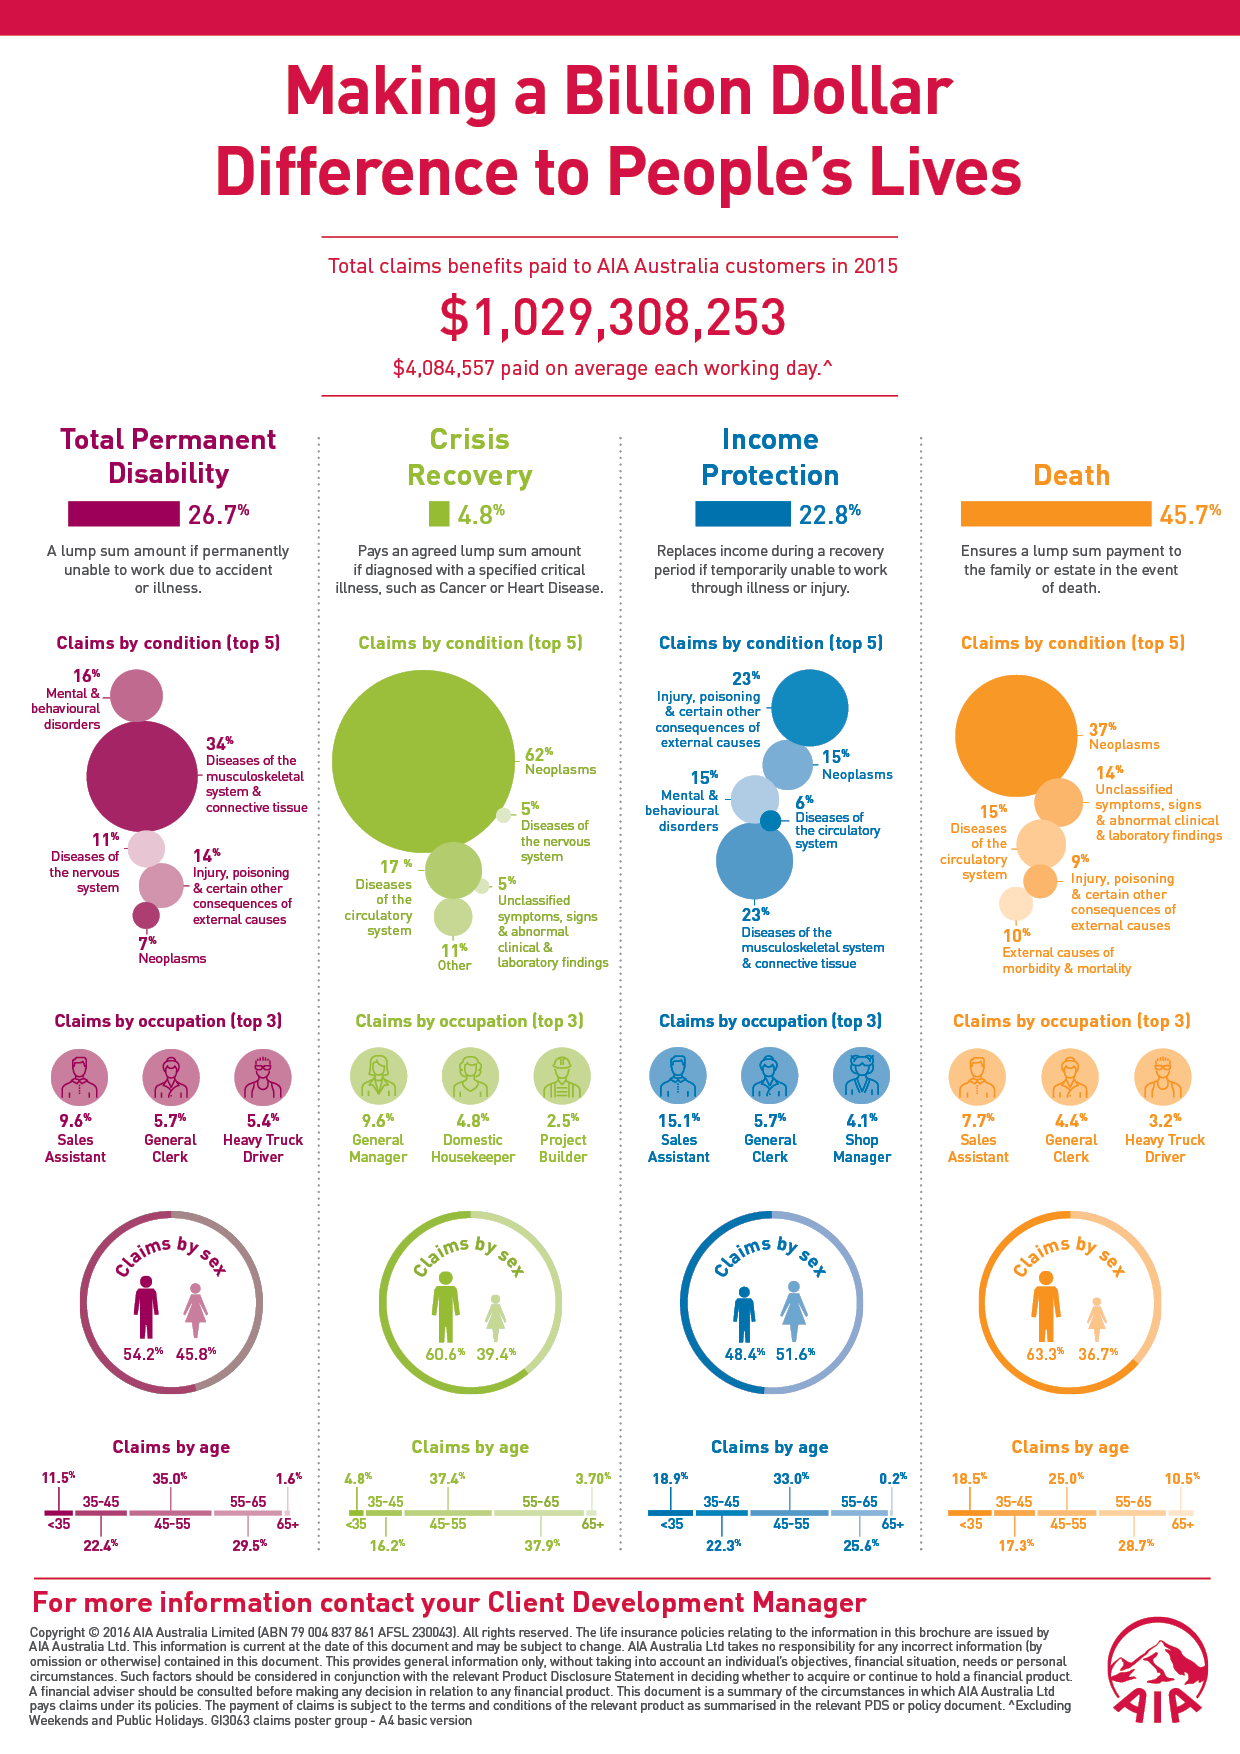 Making a Billion Dollar Difference Infographic